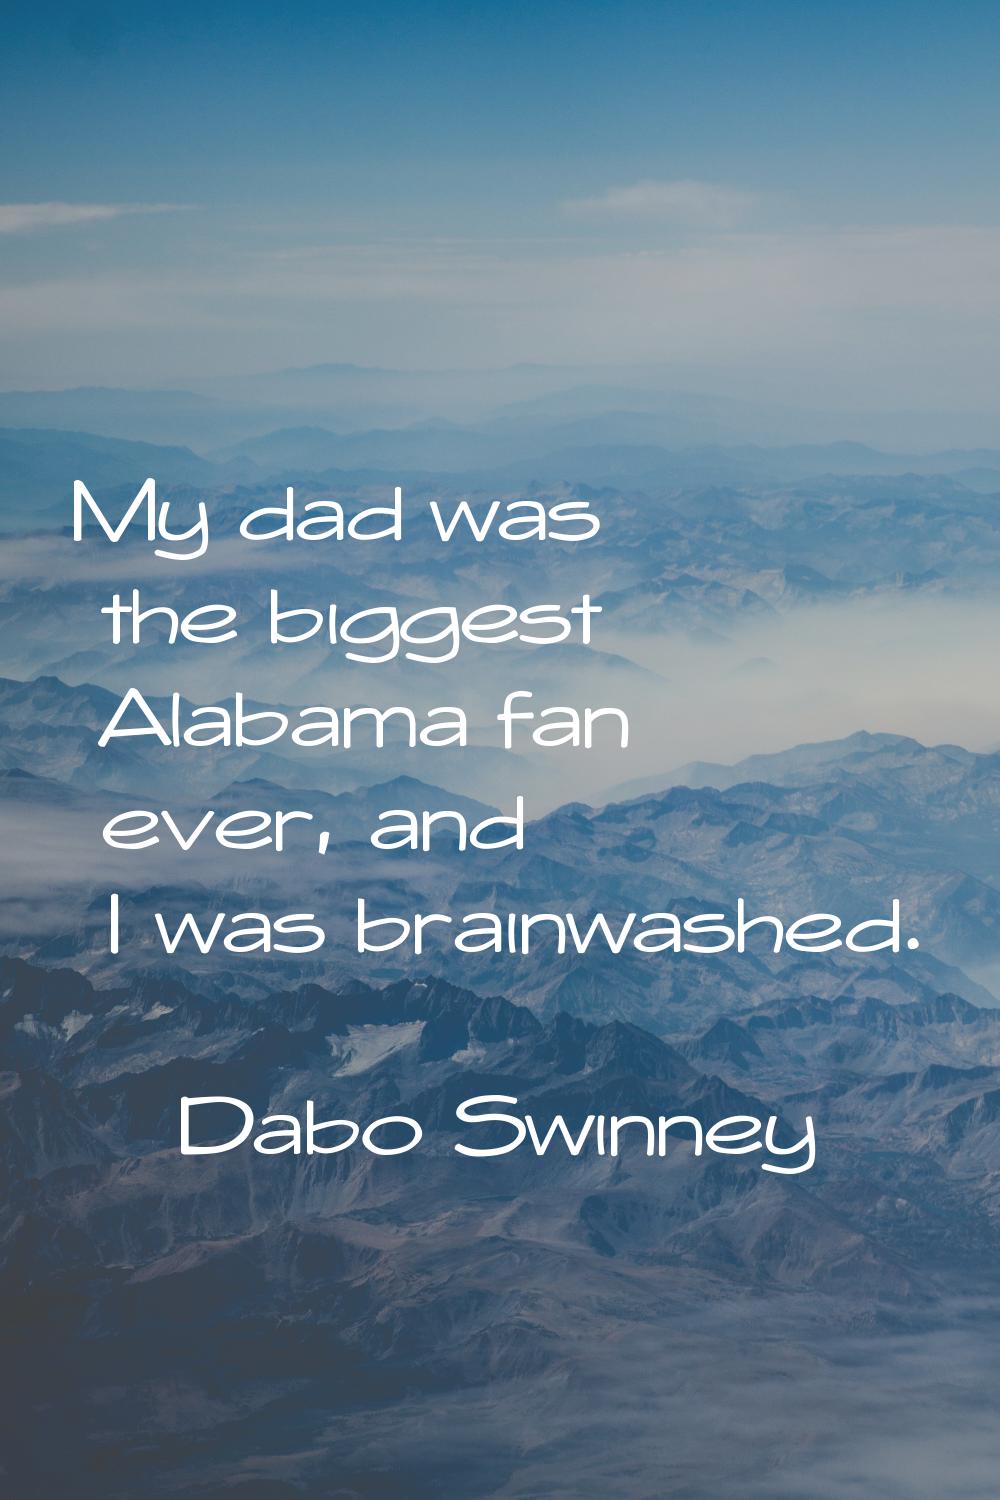 My dad was the biggest Alabama fan ever, and I was brainwashed.